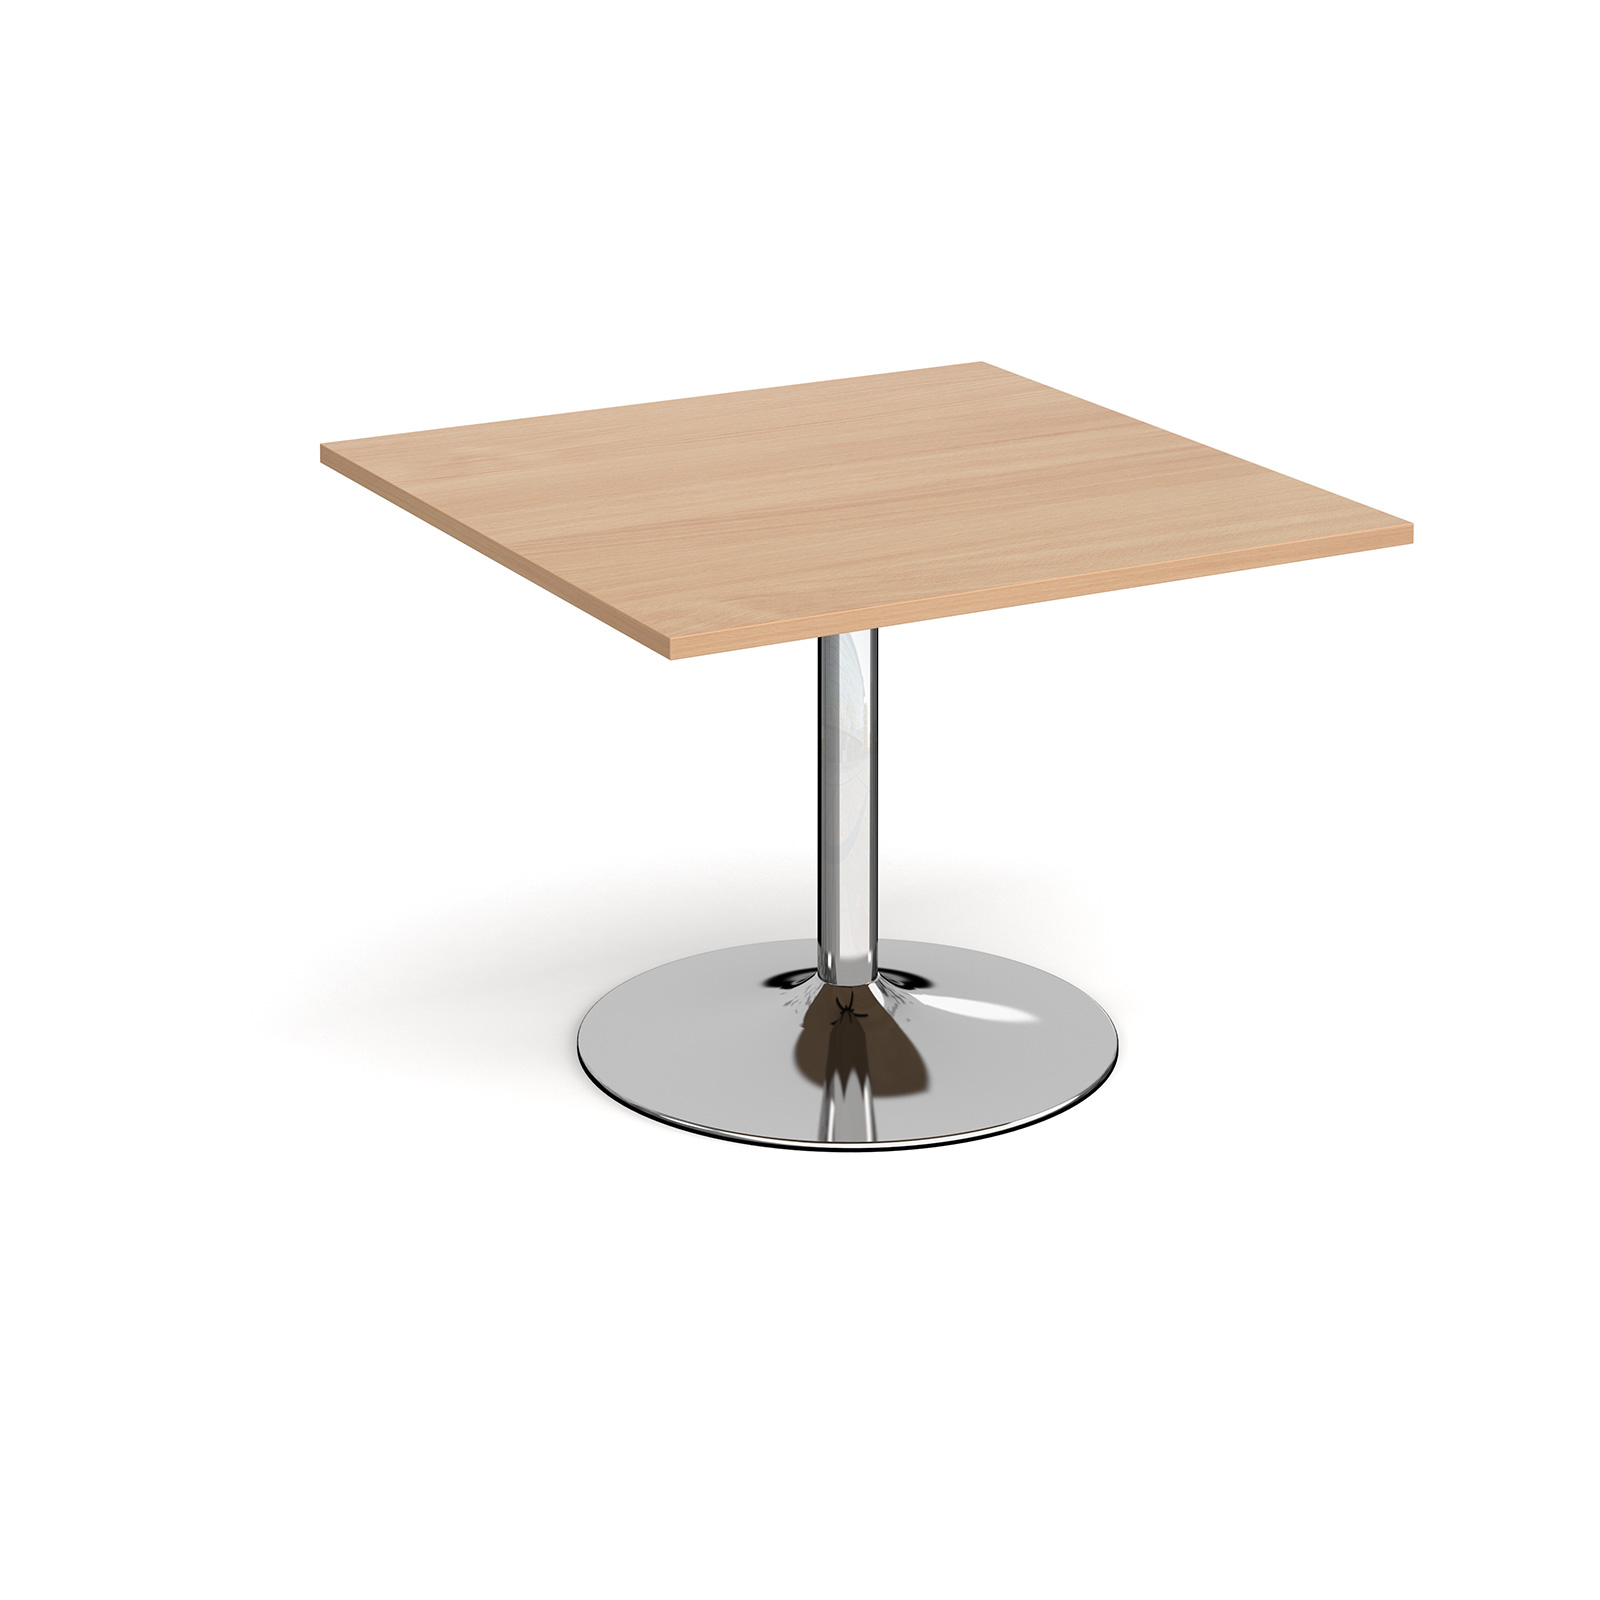 Trumpet base square extension table 1000mm x 1000mm - chrome base, beech top